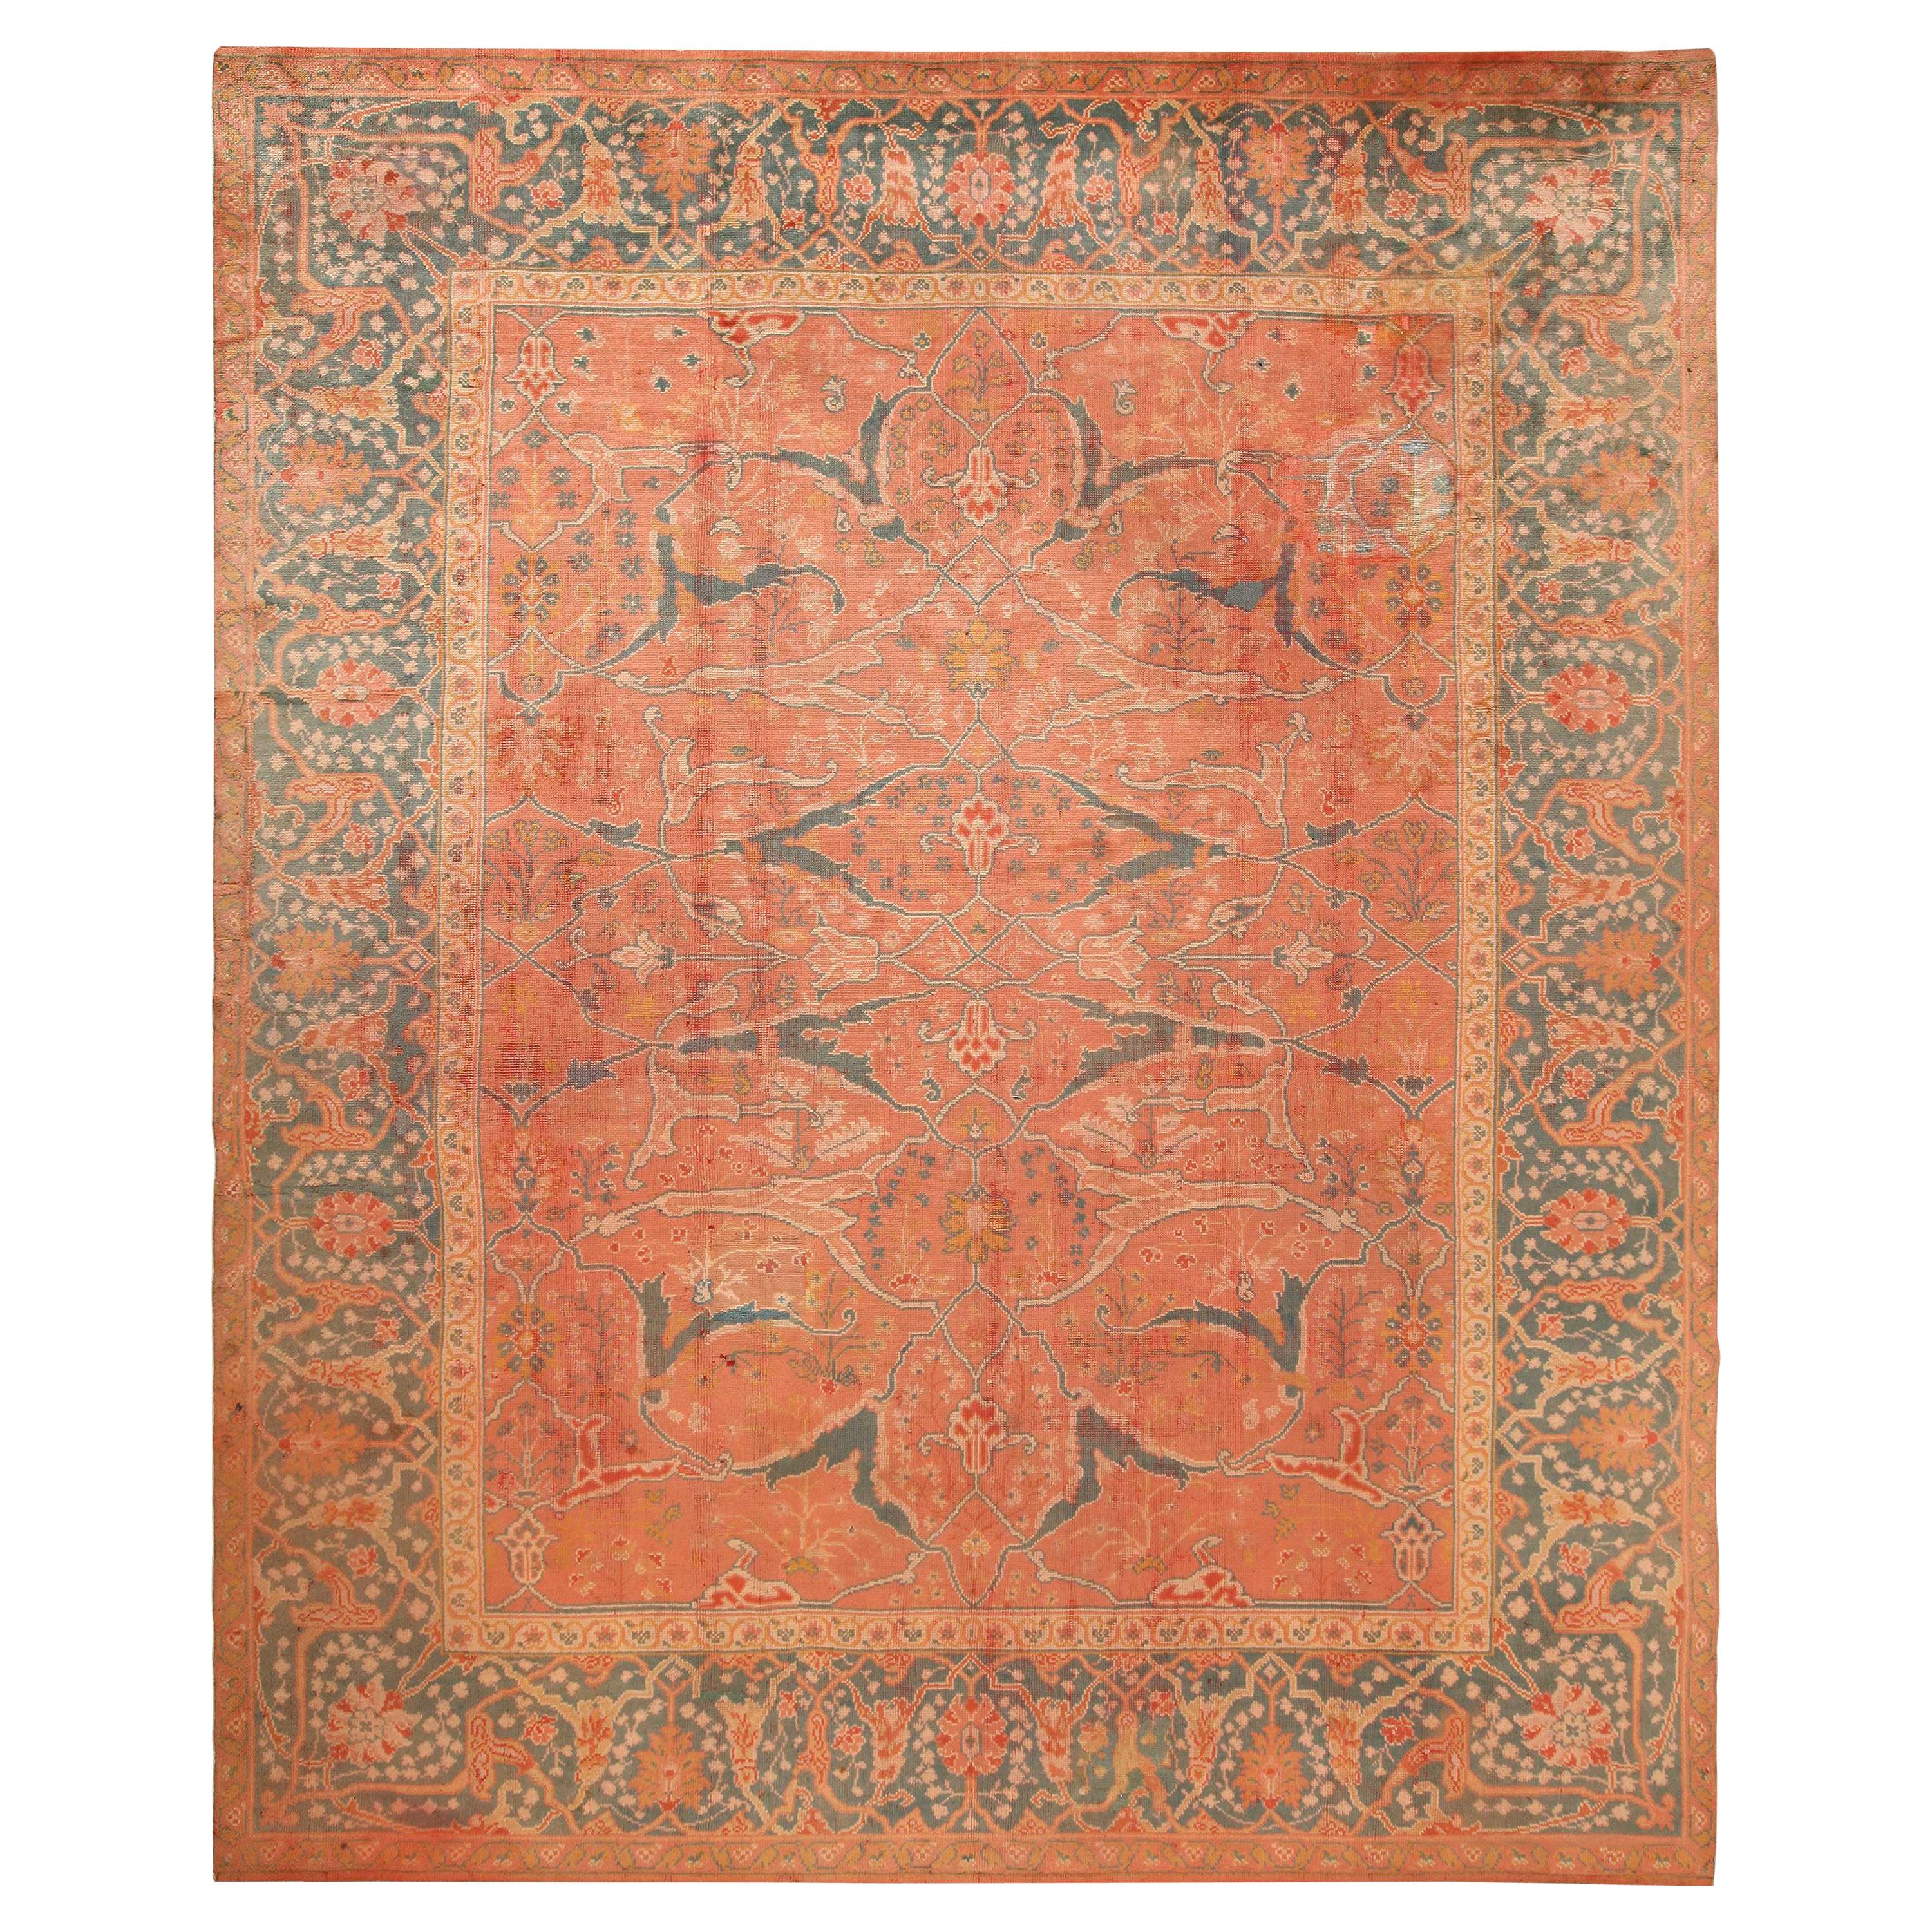 Nazmiyal Collection Coral Antique Turkish Oushak Rug. 12 ft 9 in x 16 ft 2 in